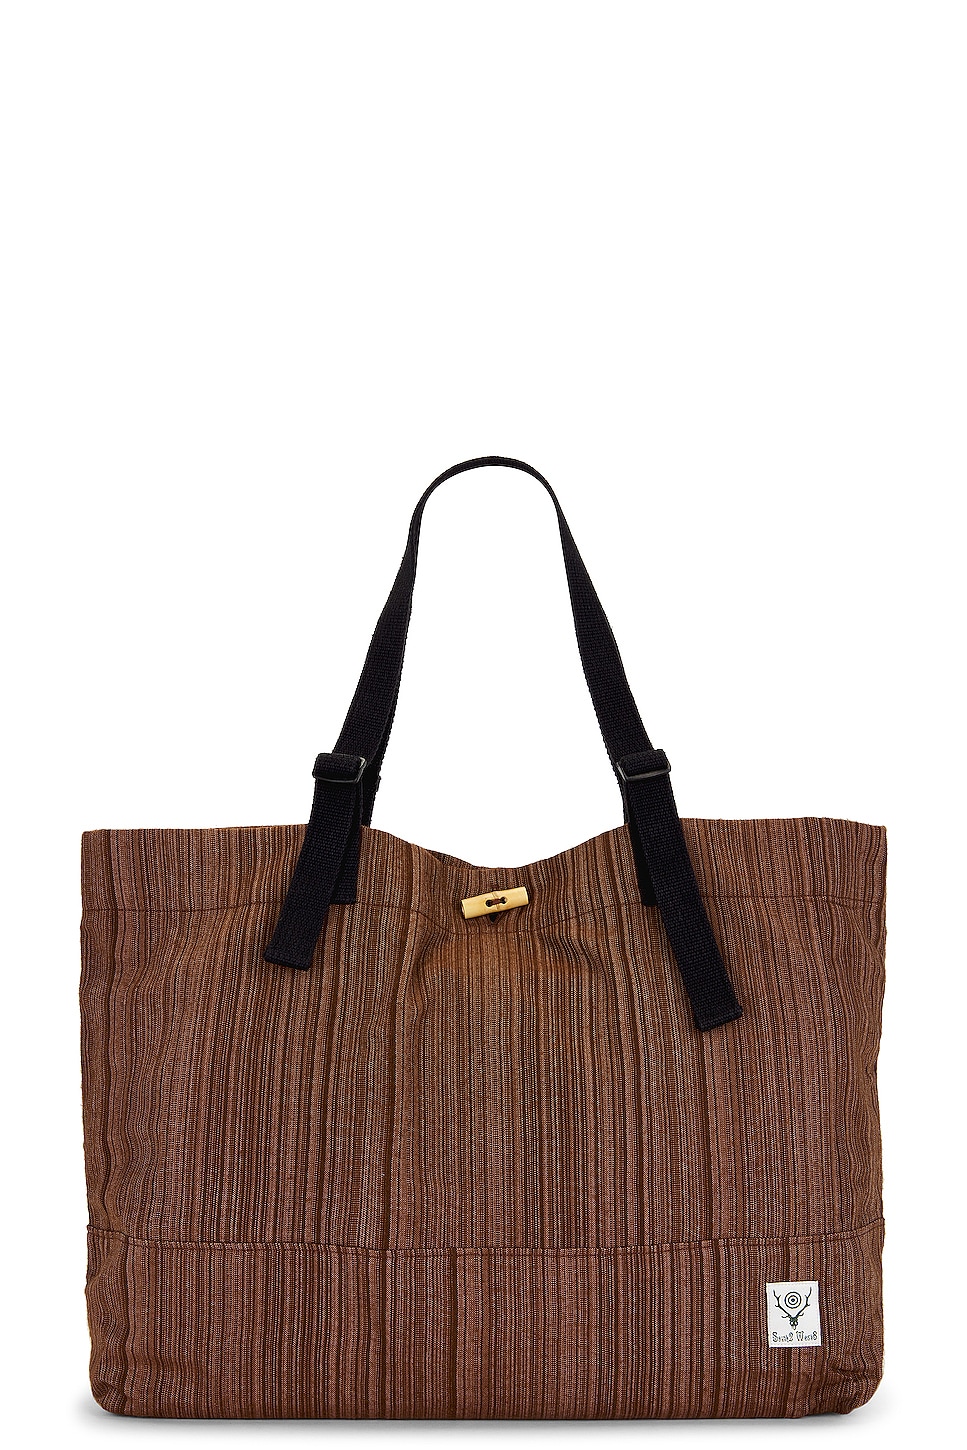 Canal Park Tote in Brown